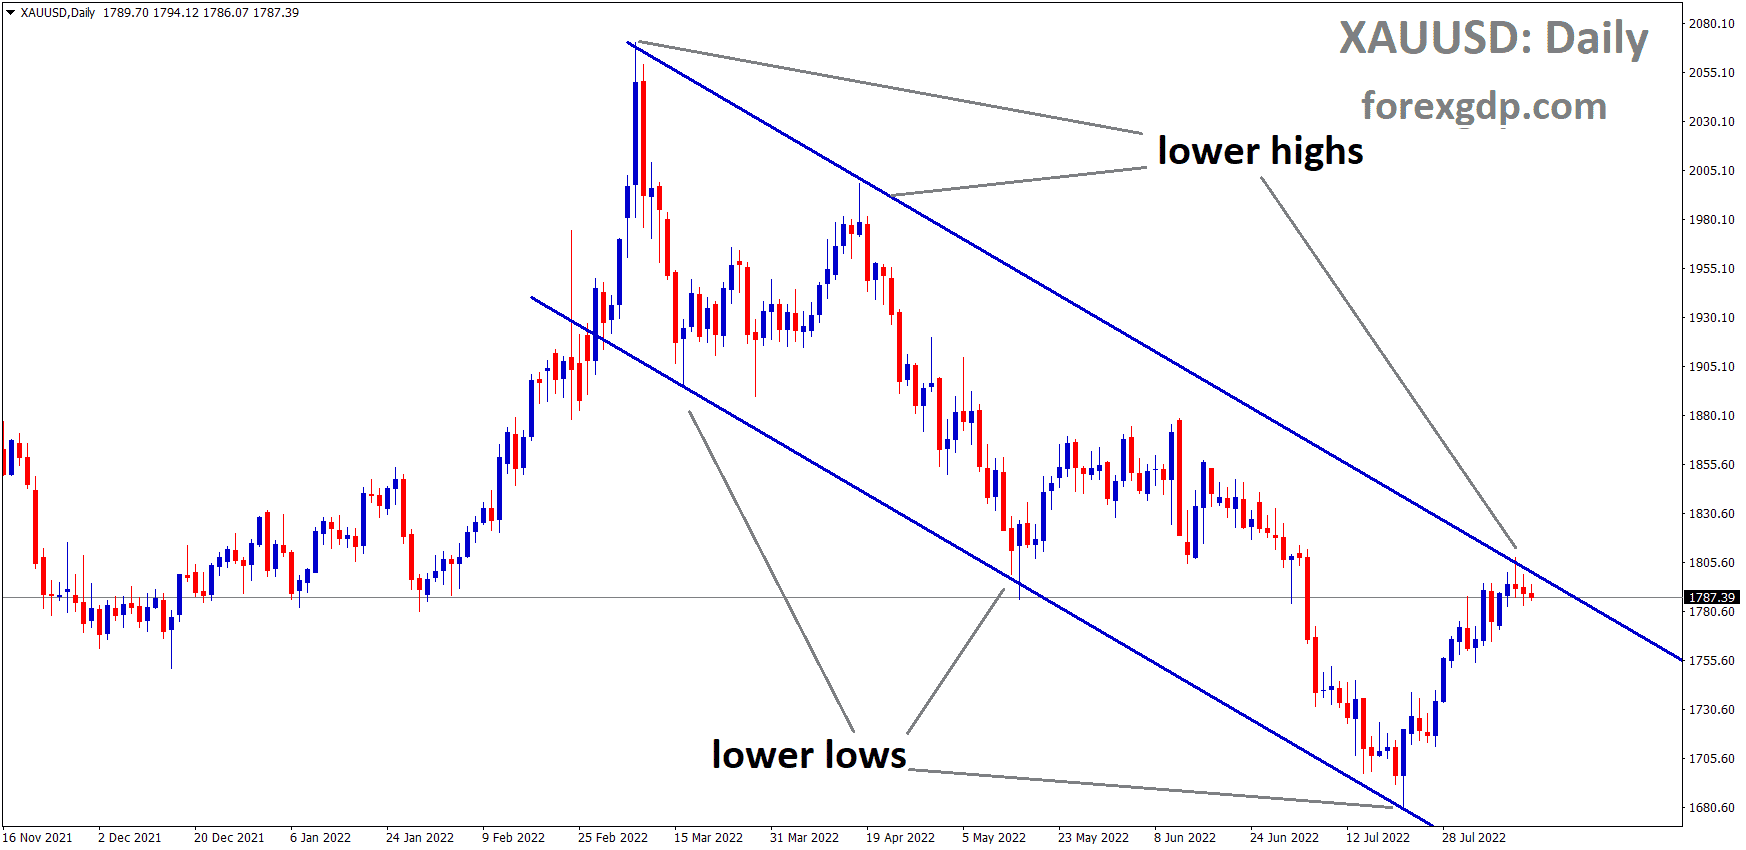 XAUUSD Gold price is moving in the Descending channel and the Market has reached the Lower high area of the channel.